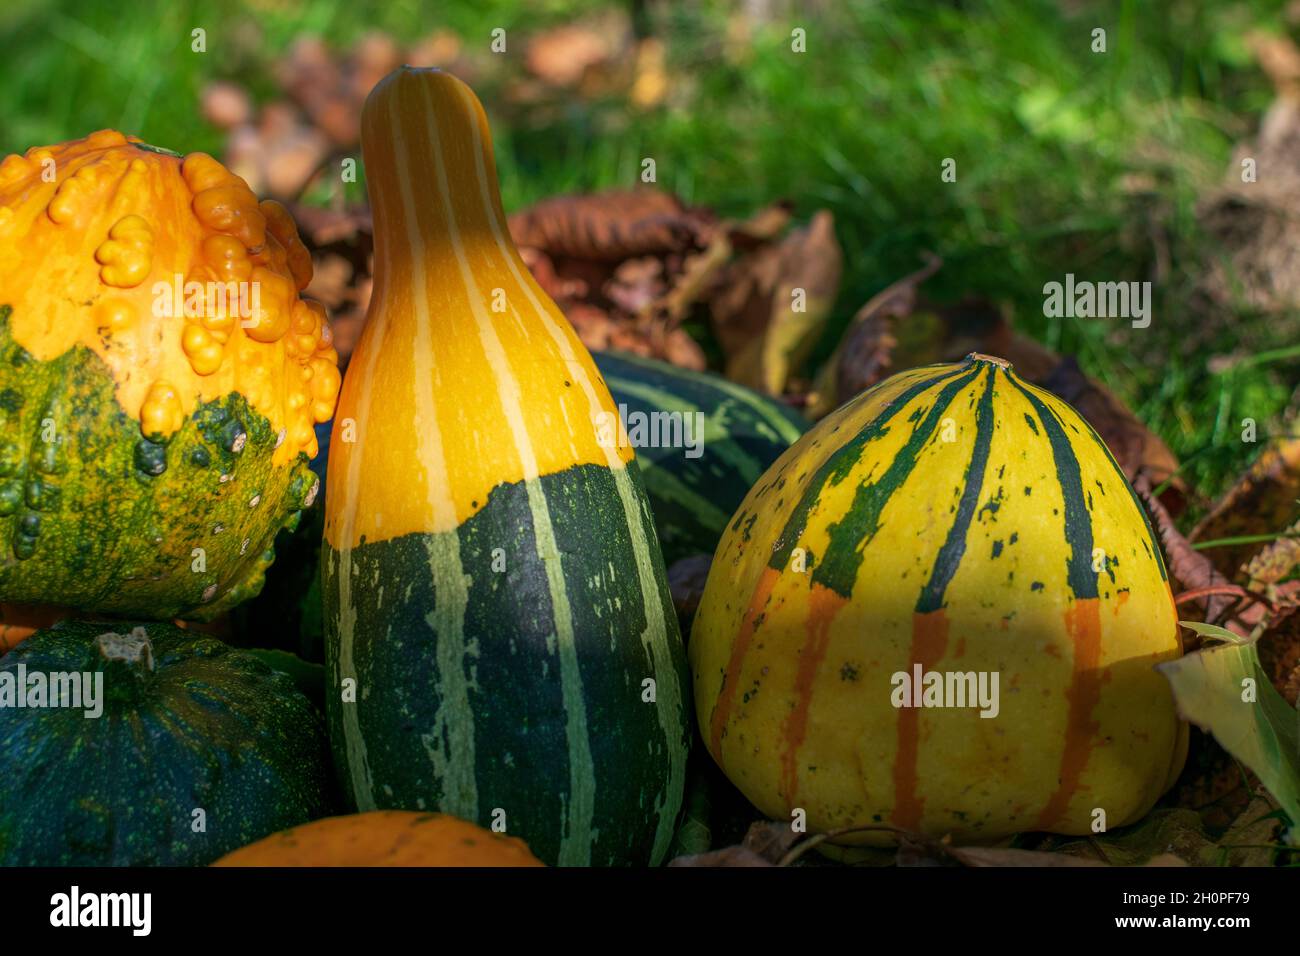 Striped gourds or pumpkins among fall's colored leaves enlightened by sunset Stock Photo